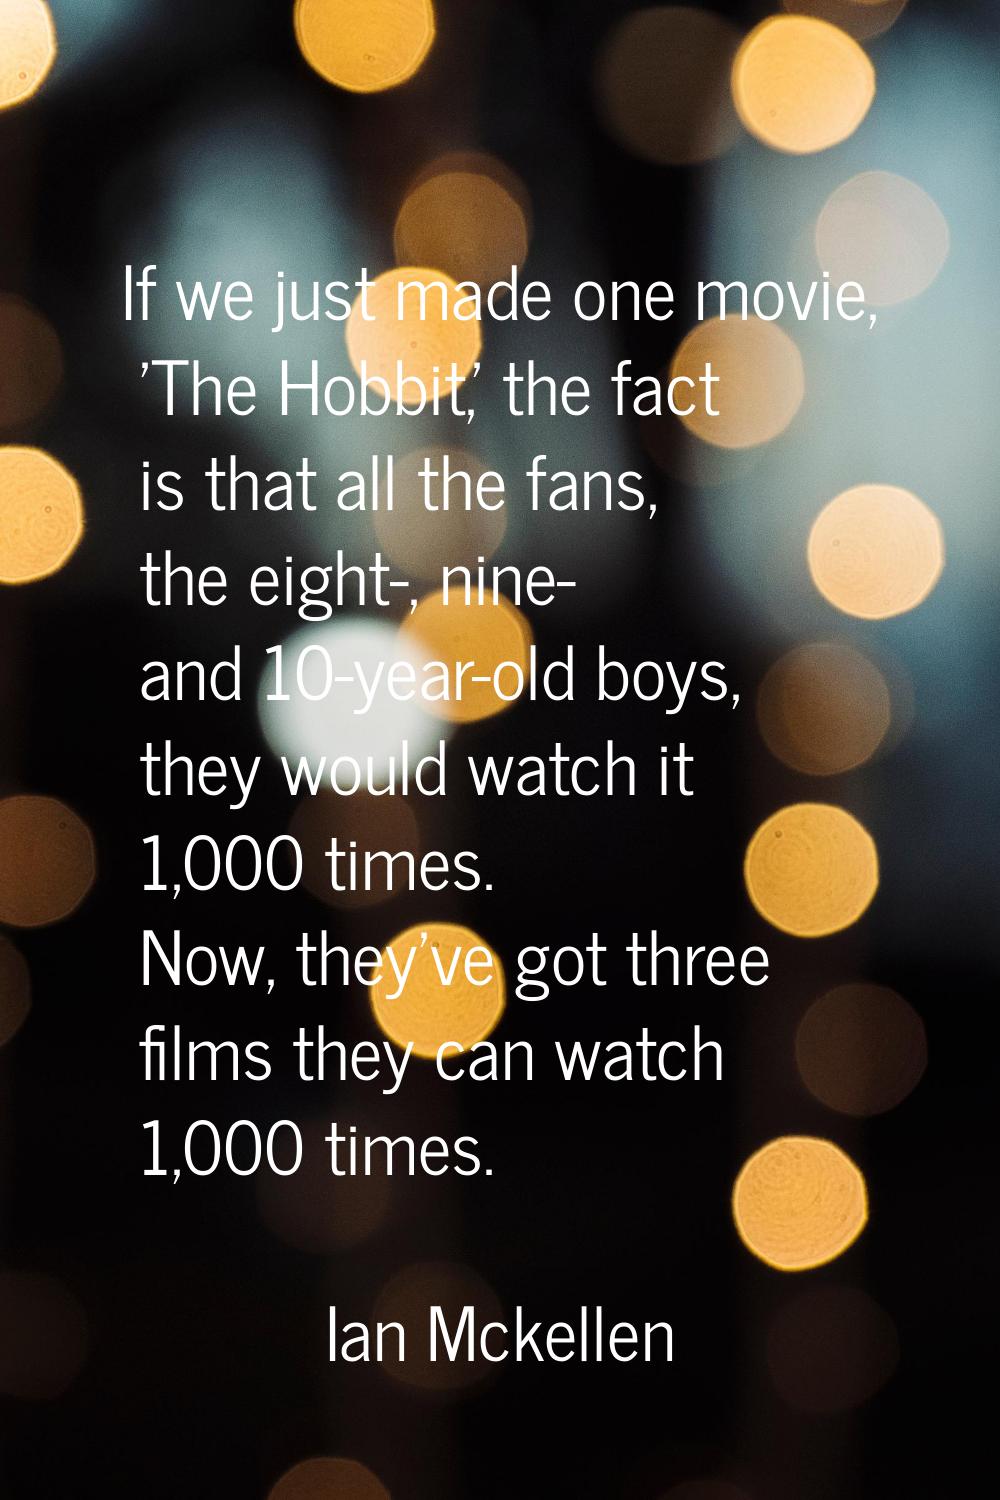 If we just made one movie, 'The Hobbit,' the fact is that all the fans, the eight-, nine- and 10-ye